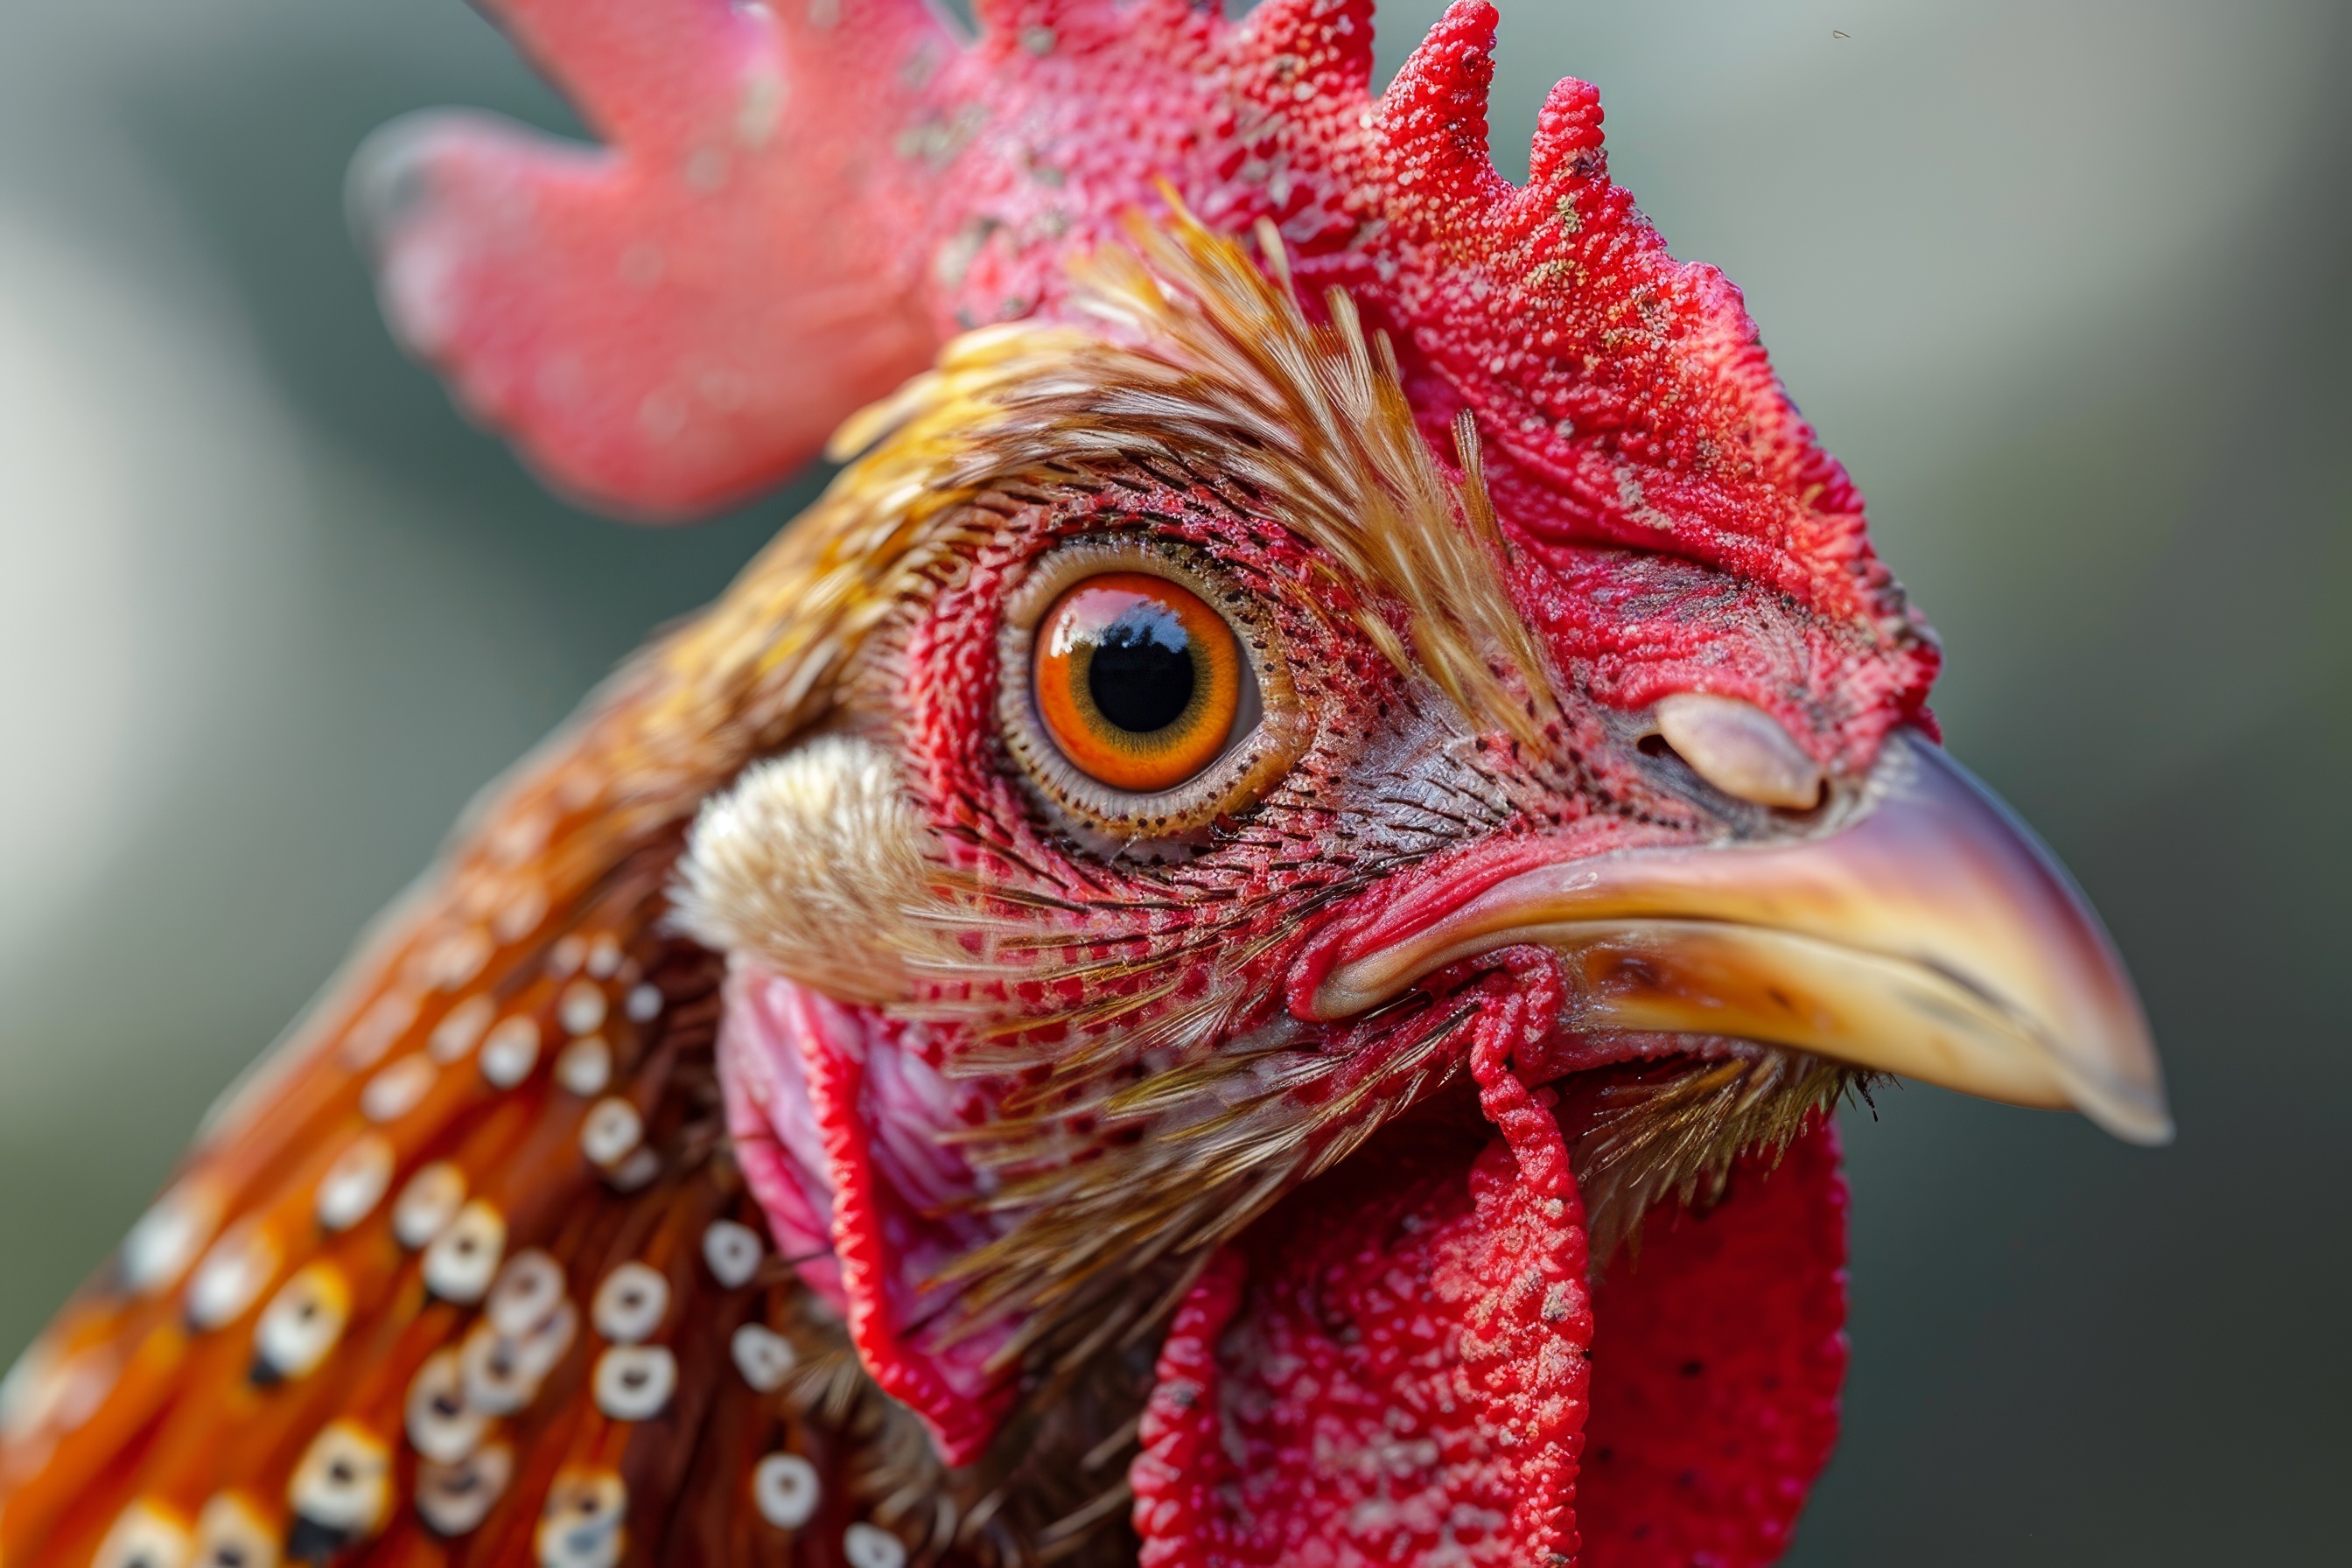 Close up view of a rooster head